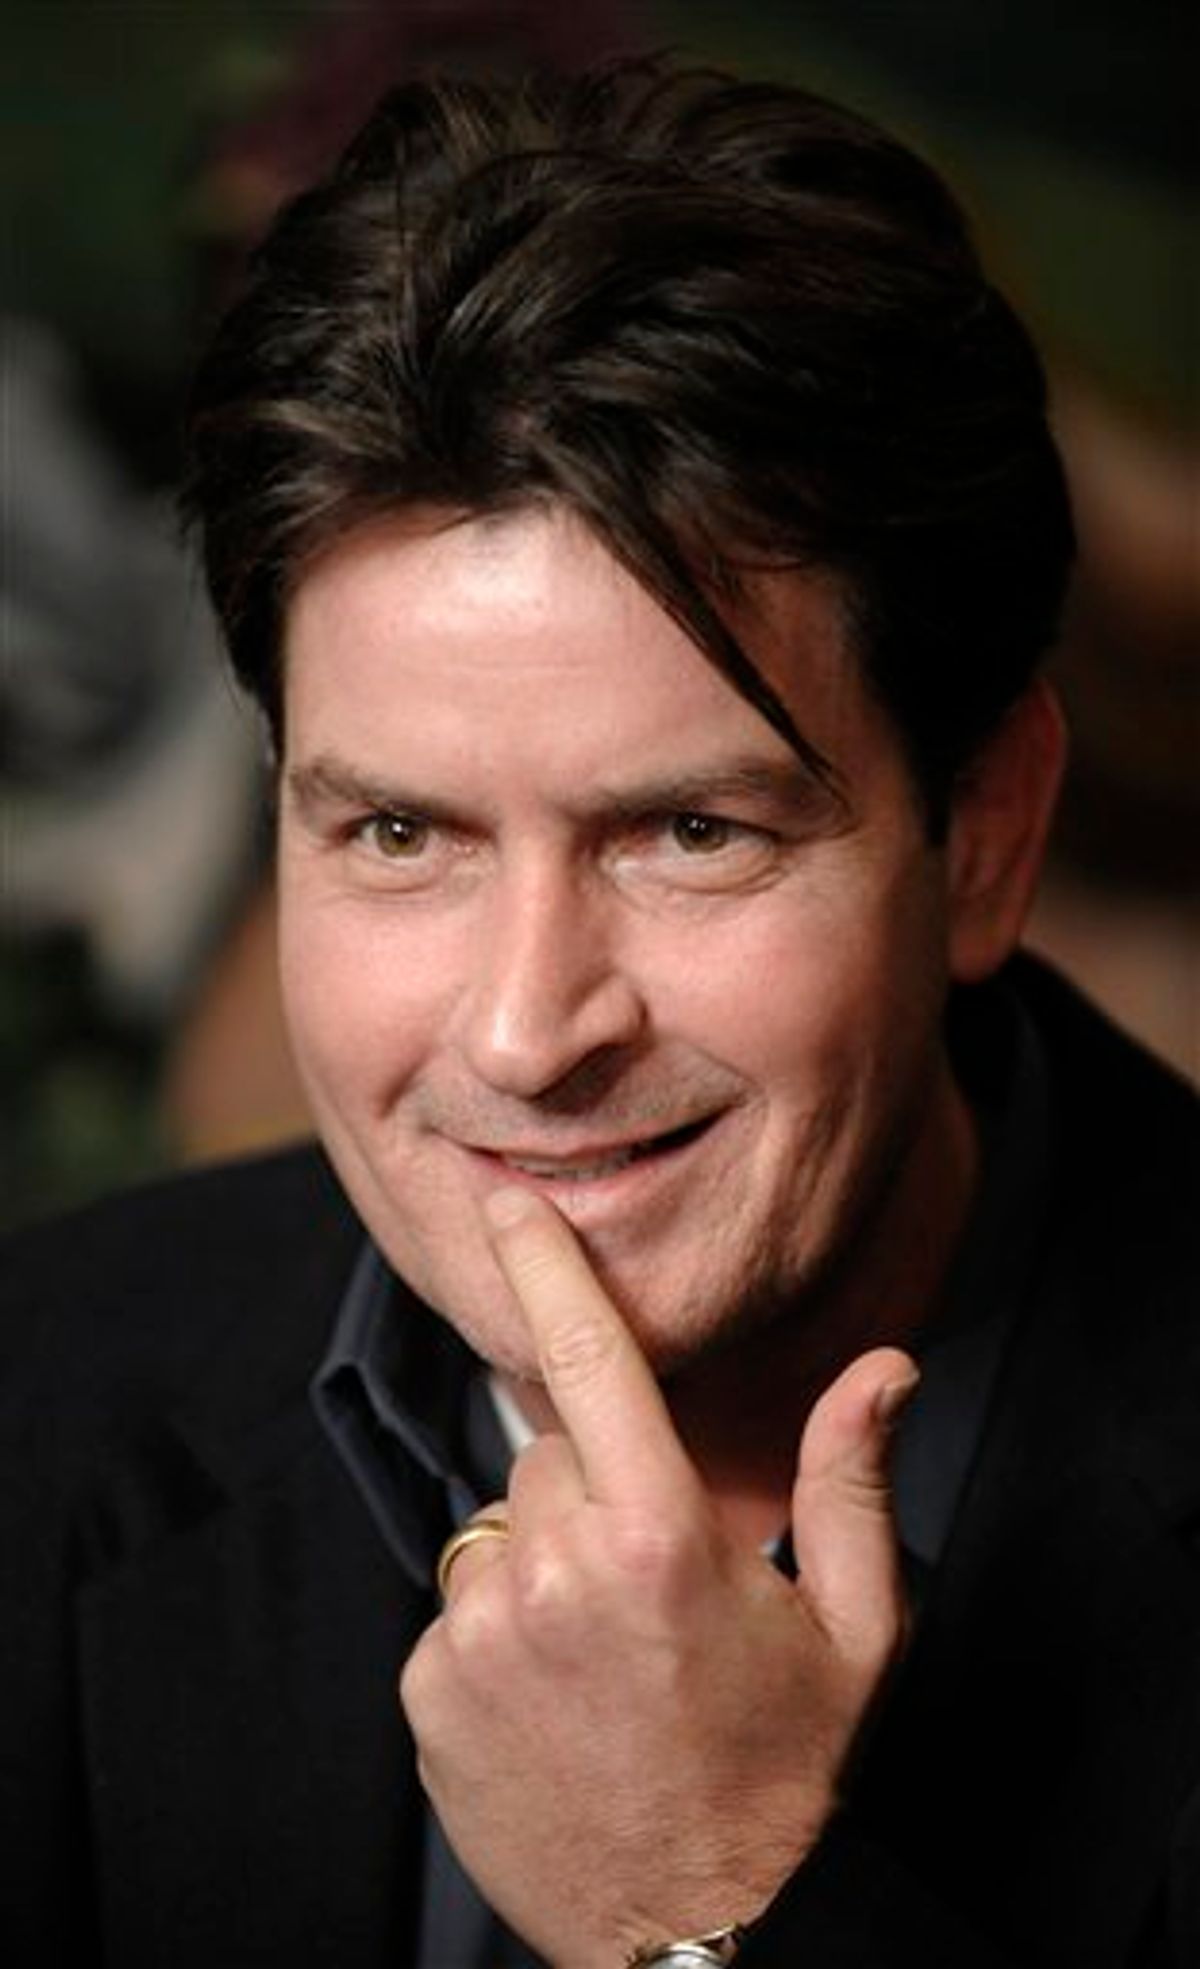 FILE - In this Jan. 28, 2009 file photo, actor Charlie Sheen is interviewed at an event to celebrate Planet Hollywood's purchase of Italian restaurant chain Buca di Beppo, at Universal CityWalk in Los Angeles. Sheen says Wednesday, March 2, 2011 that after his two young sons were removed from his house overnight, he's "very calm and focused" but ready to fight to get them back. Interviewed Wednesday live on NBC's "Today" show, Sheen confirmed the nearly 2-year-old twins, Bob and Max, were removed after a court order was granted to his estranged wife, Brooke Mueller, who is their mother. (AP Photo/Chris Pizzello, File)   (AP)